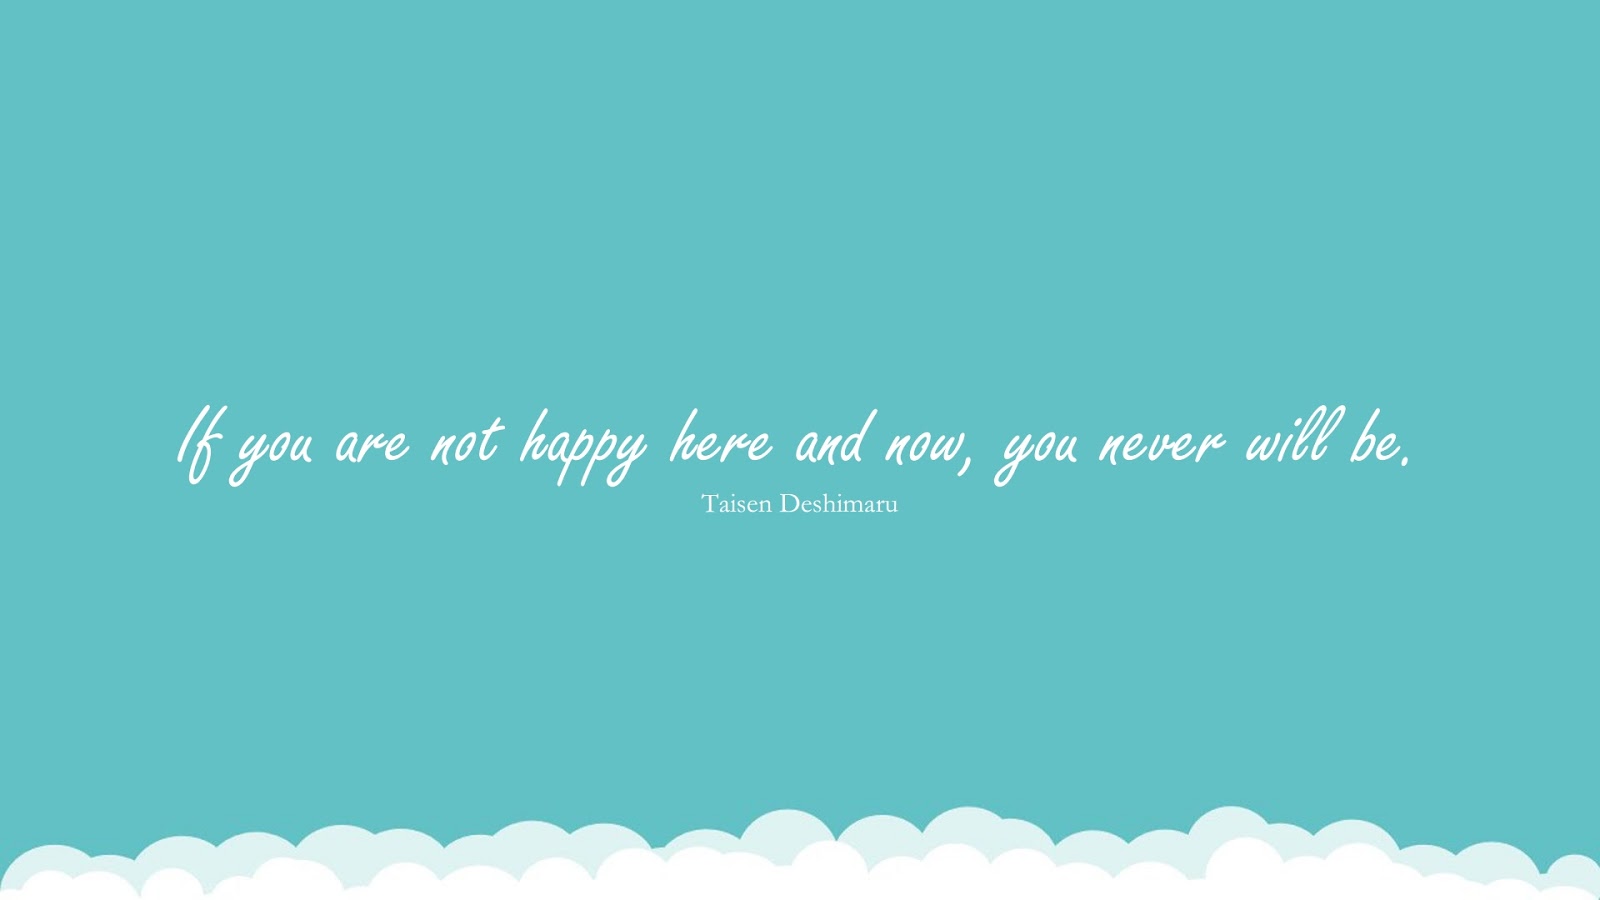 If you are not happy here and now, you never will be. (Taisen Deshimaru);  #HappinessQuotes